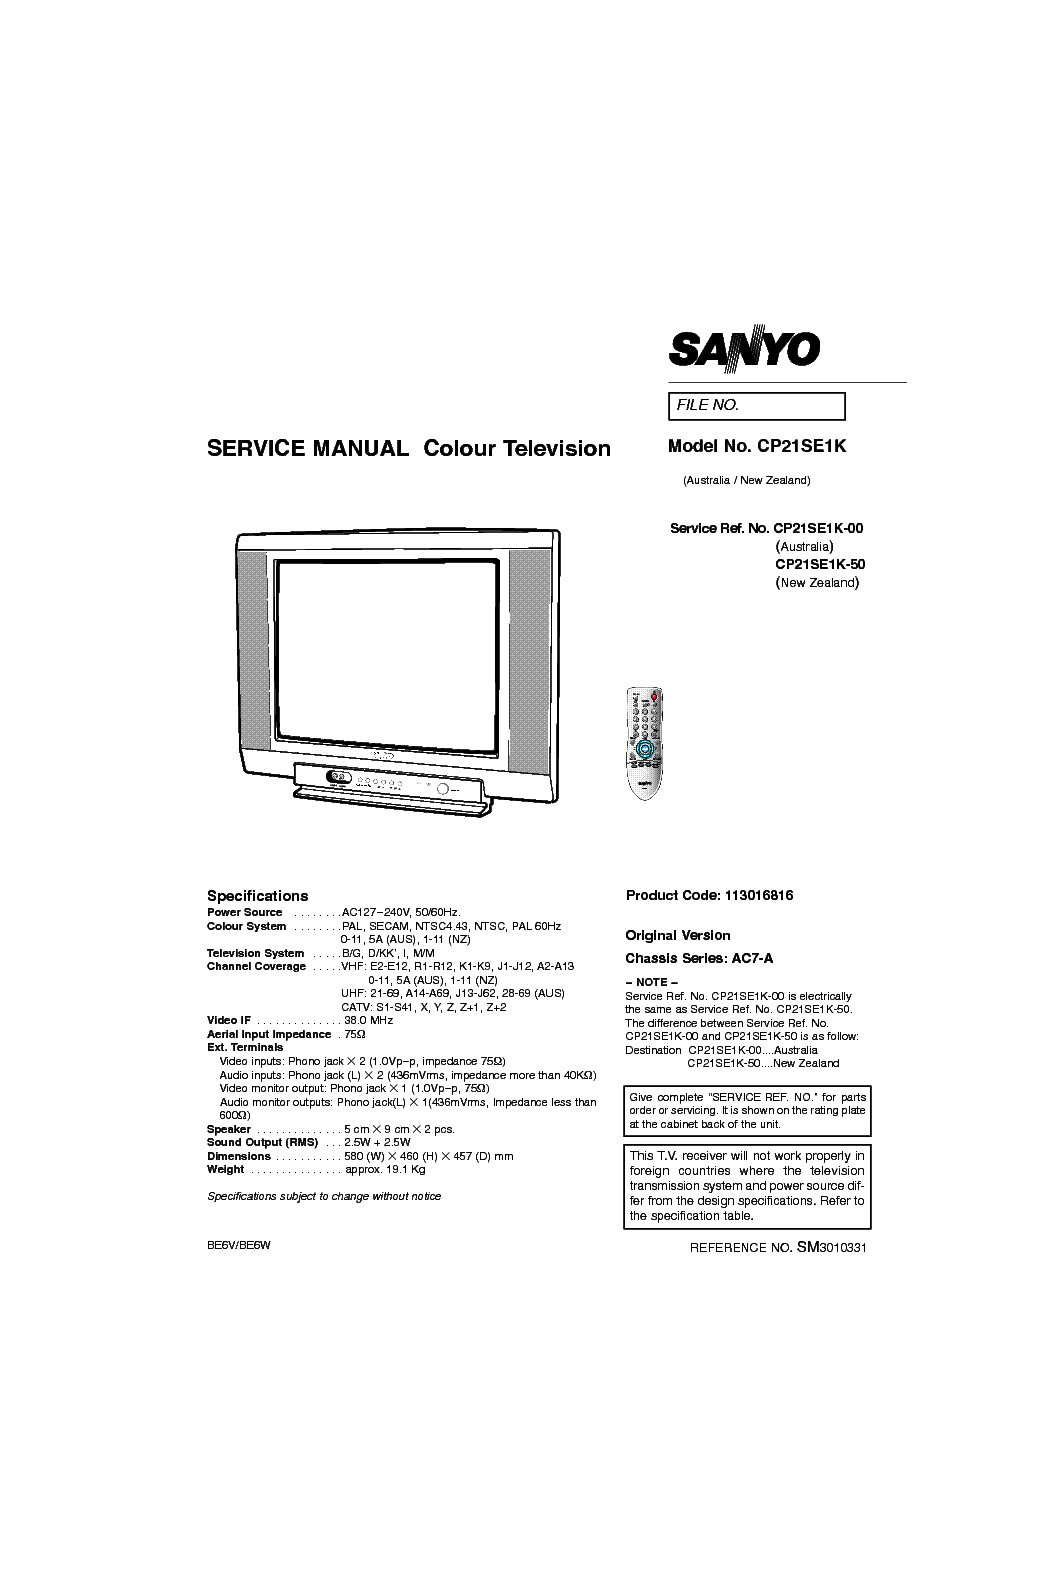 SANYO CP21SE1-K CHASSIS AC7-A SM service manual (1st page)